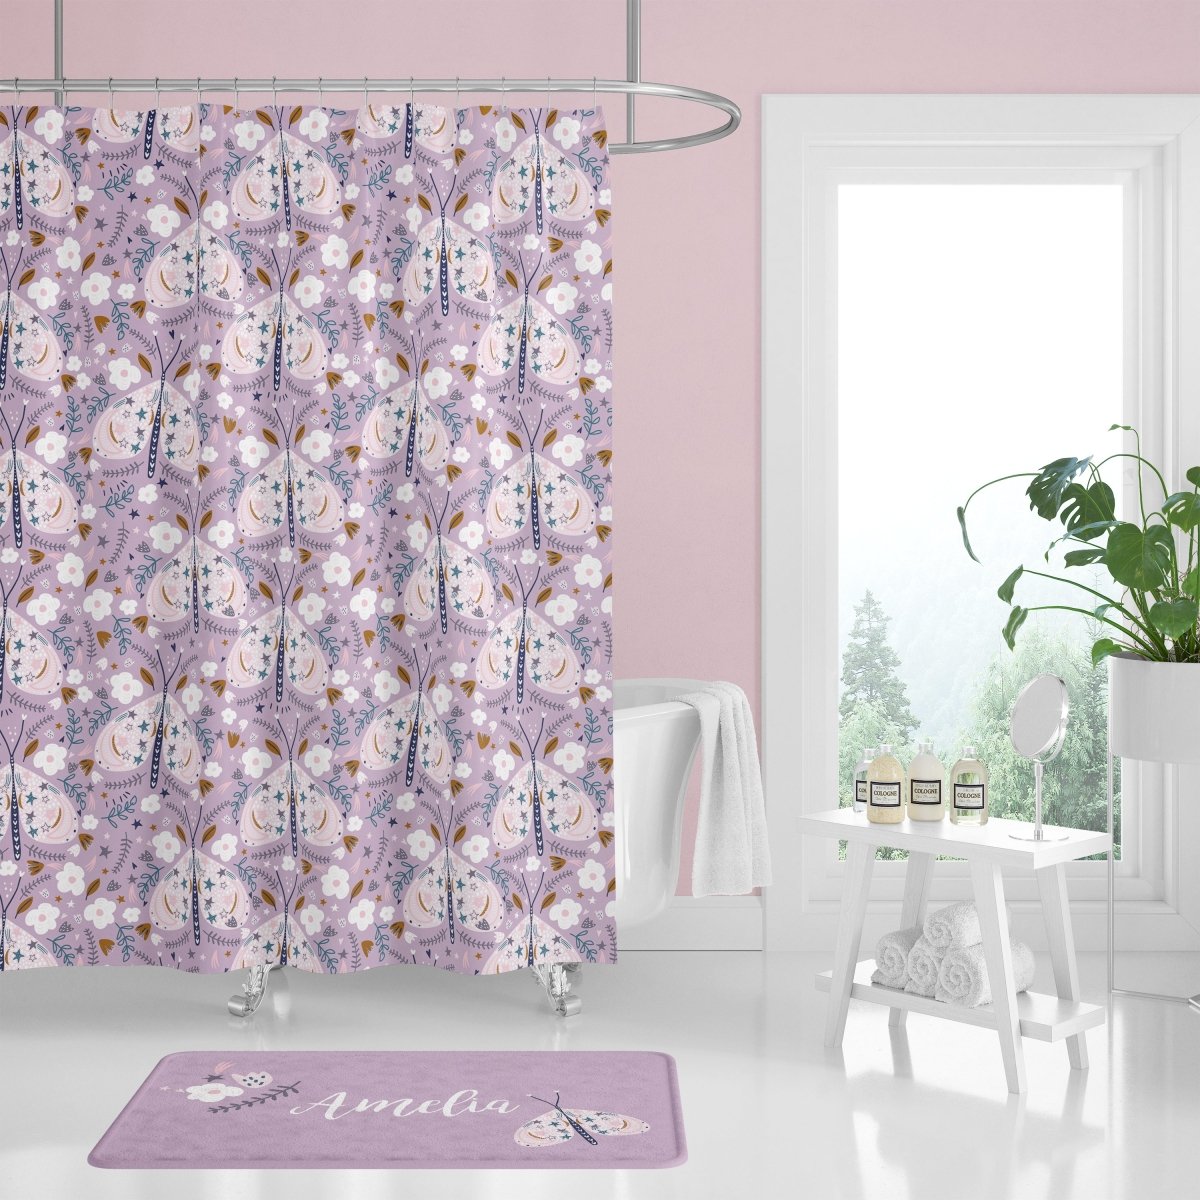 Purple Butterfly Bathroom Collection - gender_girl, Purple Butterfly, Theme_Butterfly